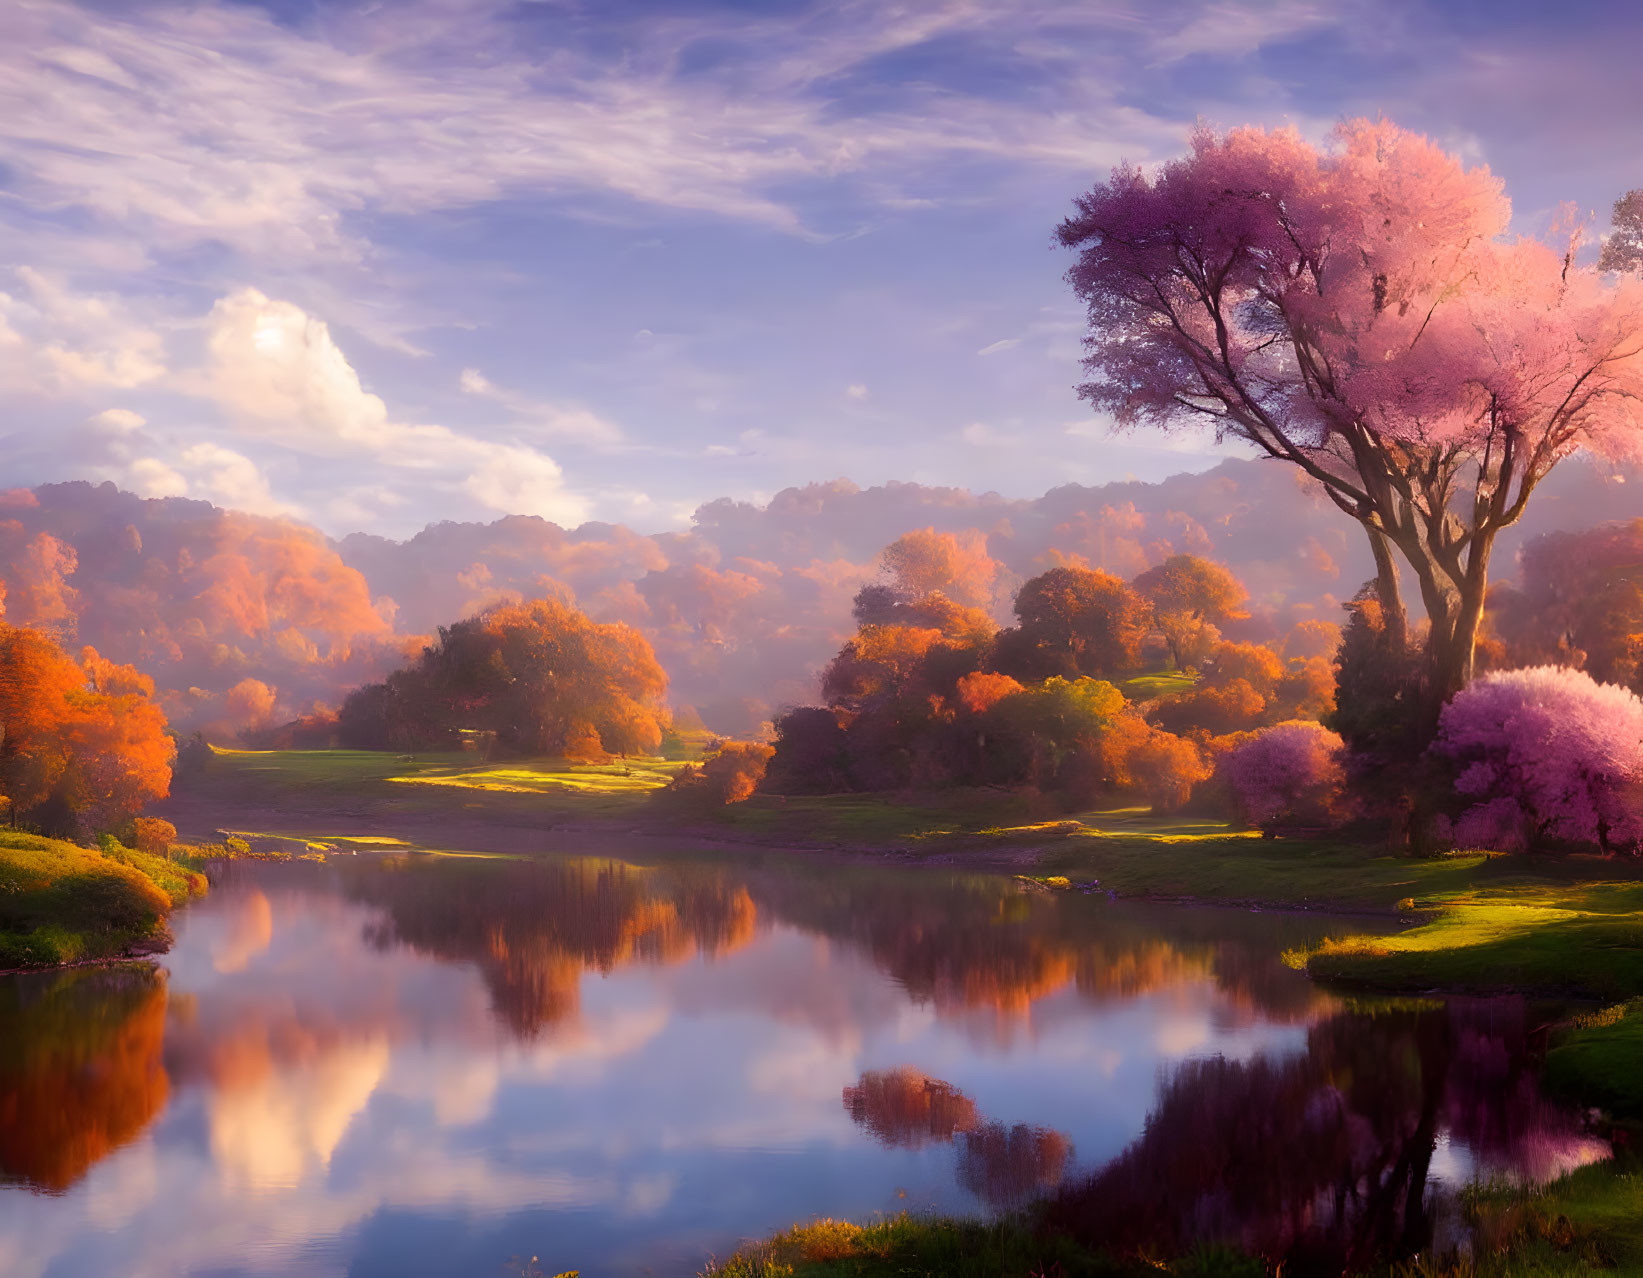 Tranquil dawn landscape with pink trees, calm lake, and lush orange foliage